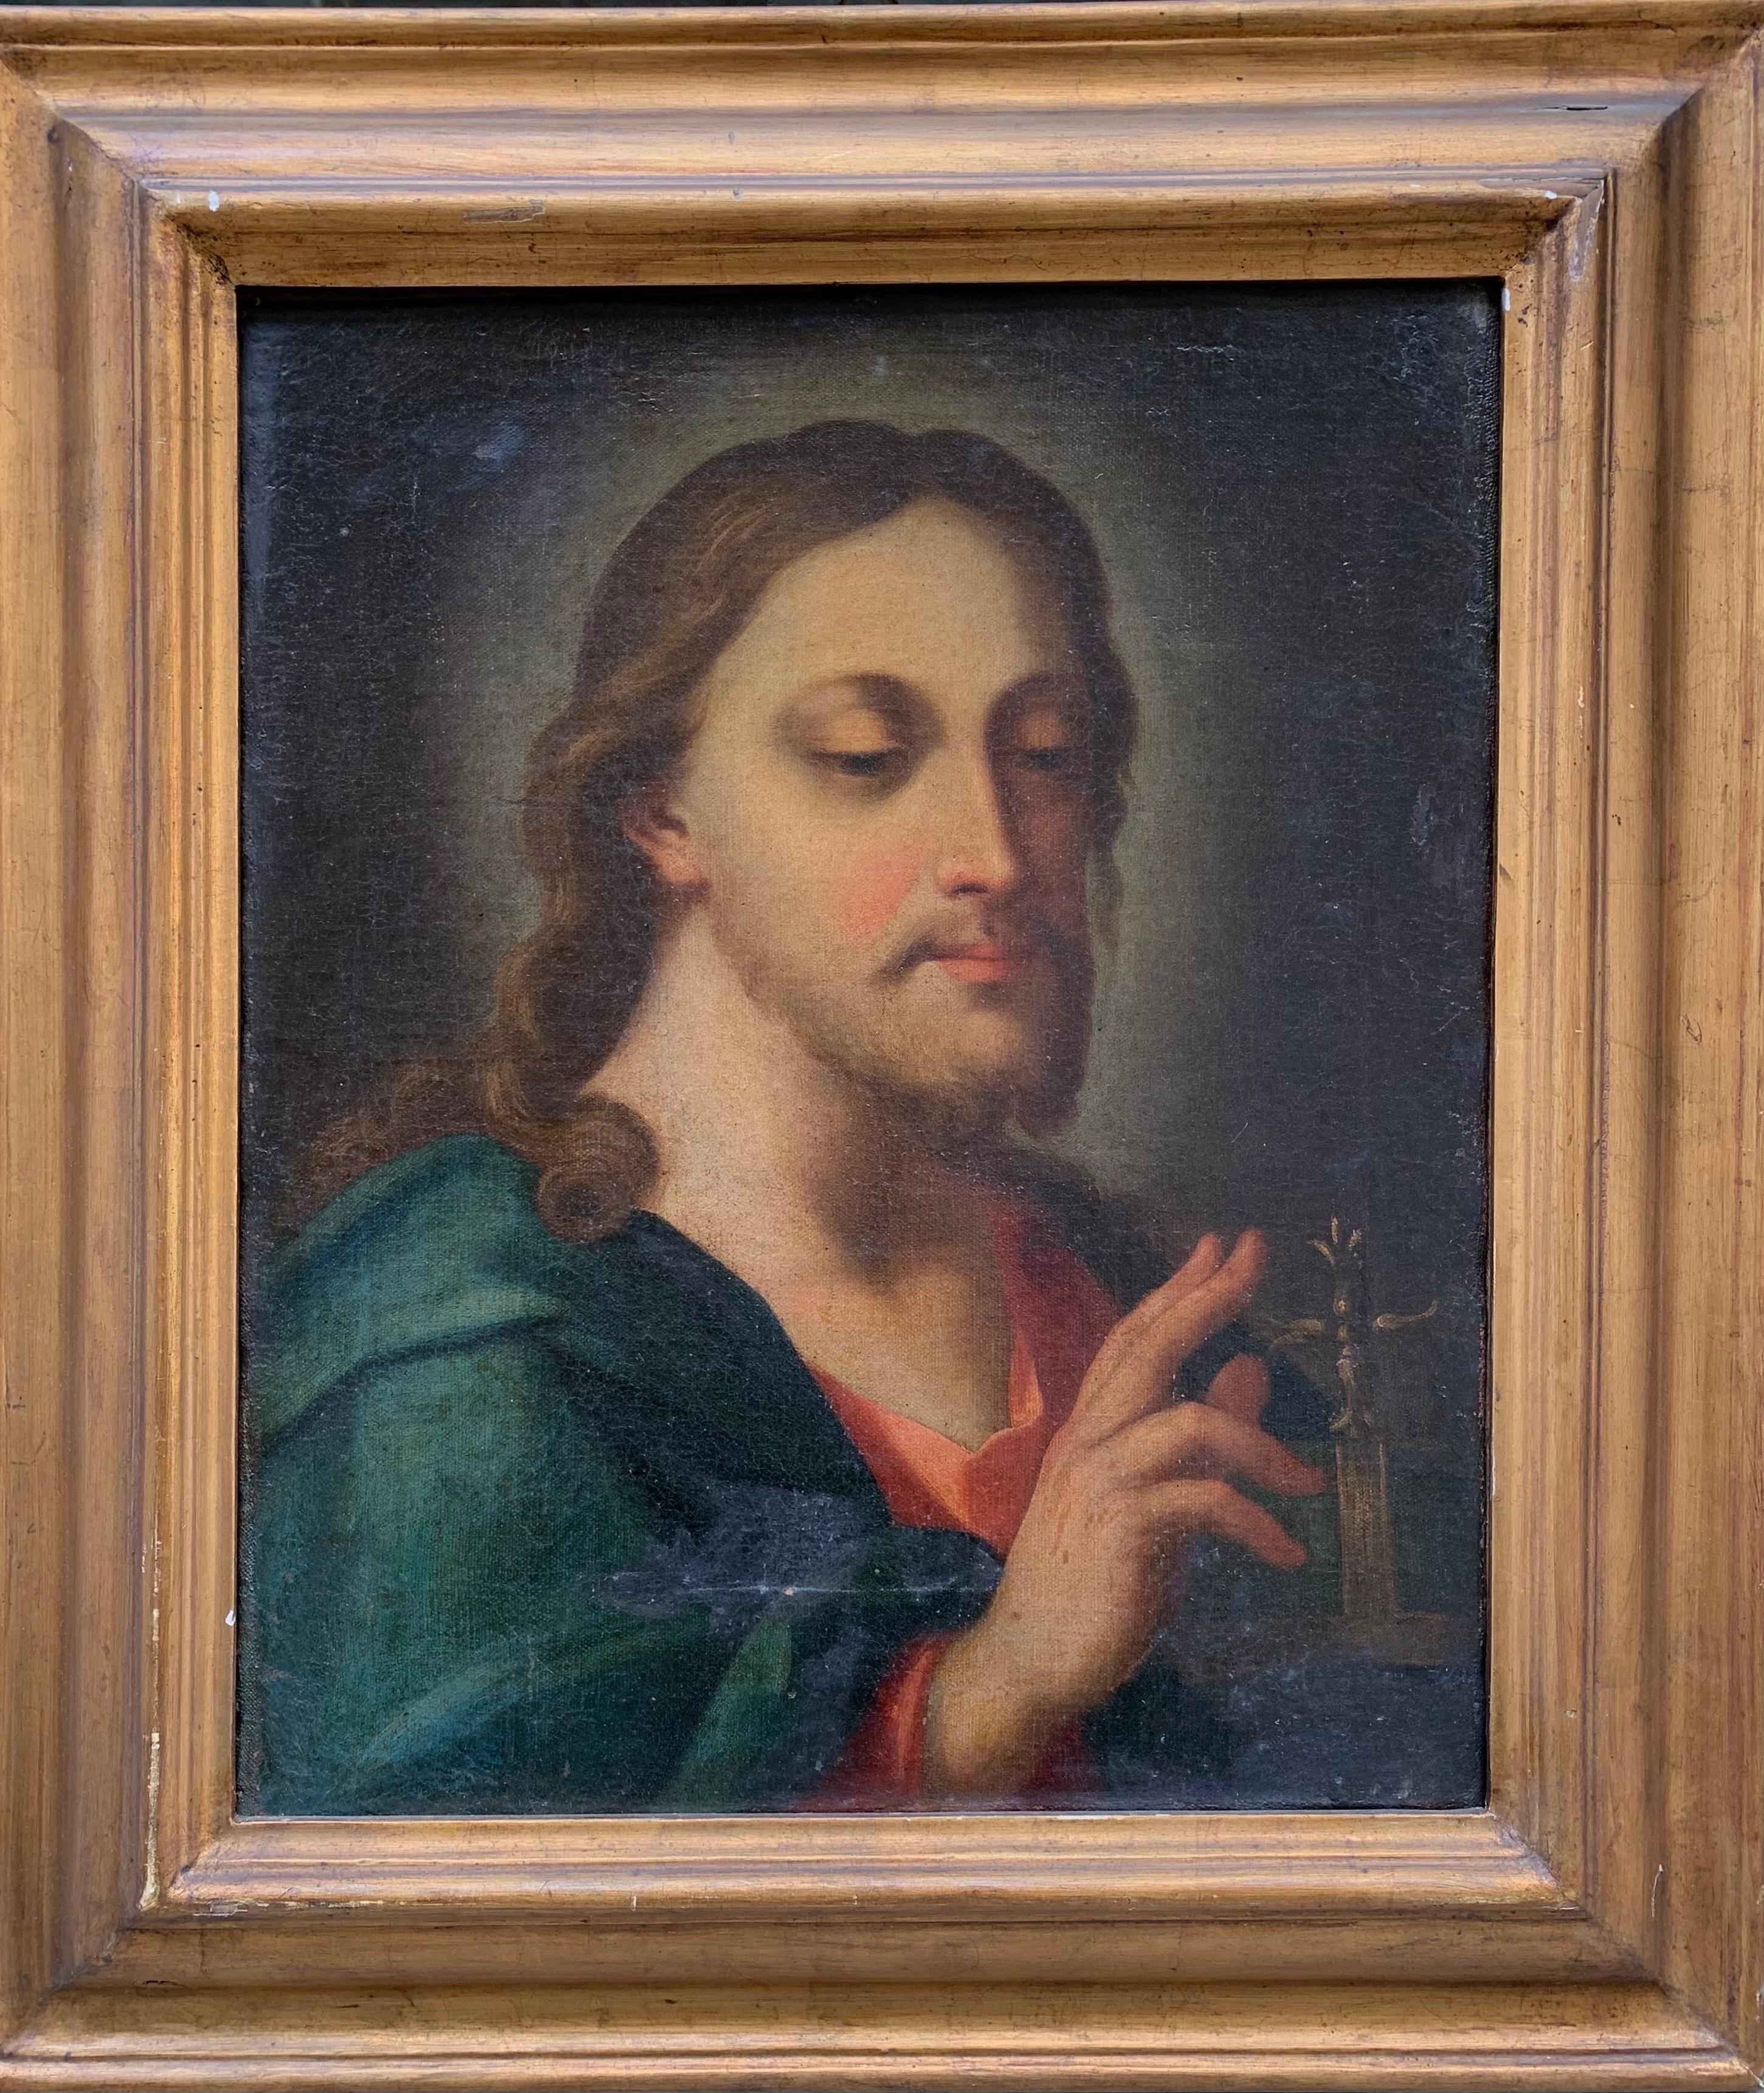 Blessing Christ, or Salvator mundi. 
Italian school, 18th century. 
Oil on canvas technique. 
Relined. 
Some signs of aging, wear, scratches, some old minor restorations are visible. 
Respiration in oué studio is a aimable on request. 
In fair